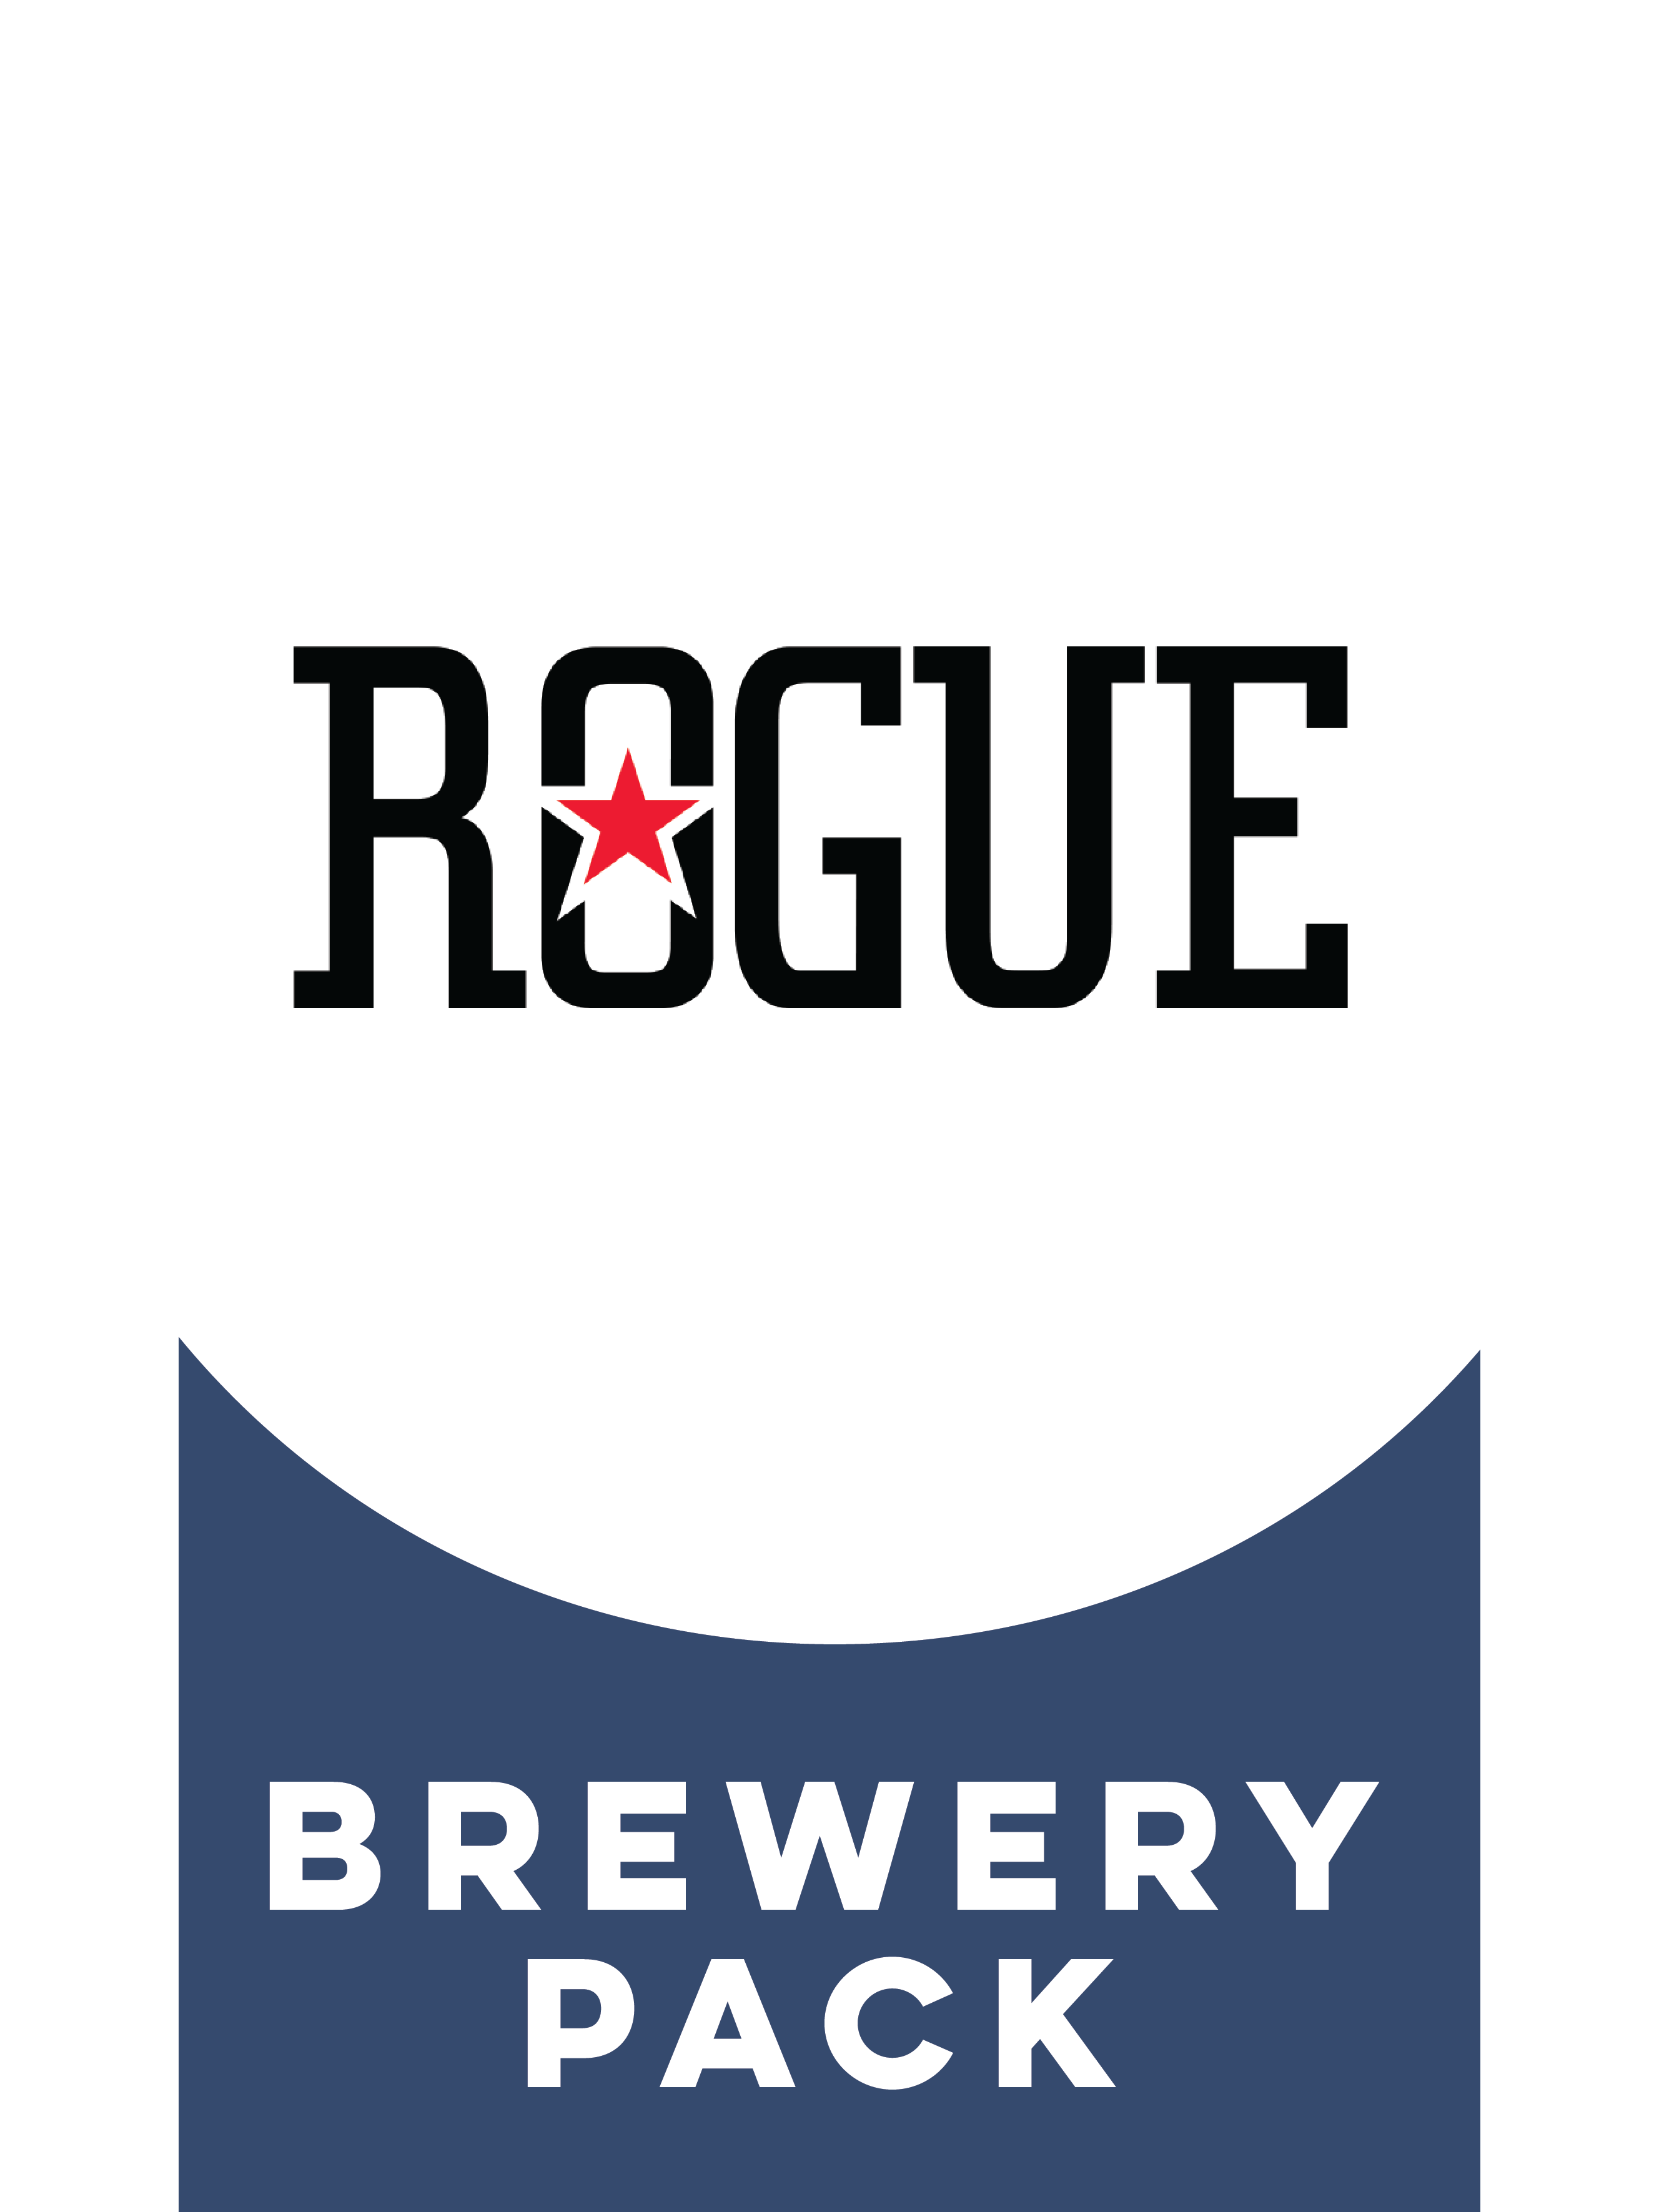 -Rogue- Rogue Brewery Pack-Packs & Cases- Only @ Beer Republic - The best online beer store for American & Canadian craft beer - Buy beer online from the USA and Canada - Bier online kopen - Amerikaans bier kopen - Craft beer store - Craft beer kopen - Amerikanisch bier kaufen - Bier online kaufen - Acheter biere online - IPA - Stout - Porter - New England IPA - Hazy IPA - Imperial Stout - Barrel Aged - Barrel Aged Imperial Stout - Brown - Dark beer - Blond - Blonde - Pilsner - Lager - Wheat - Weizen - Ambe